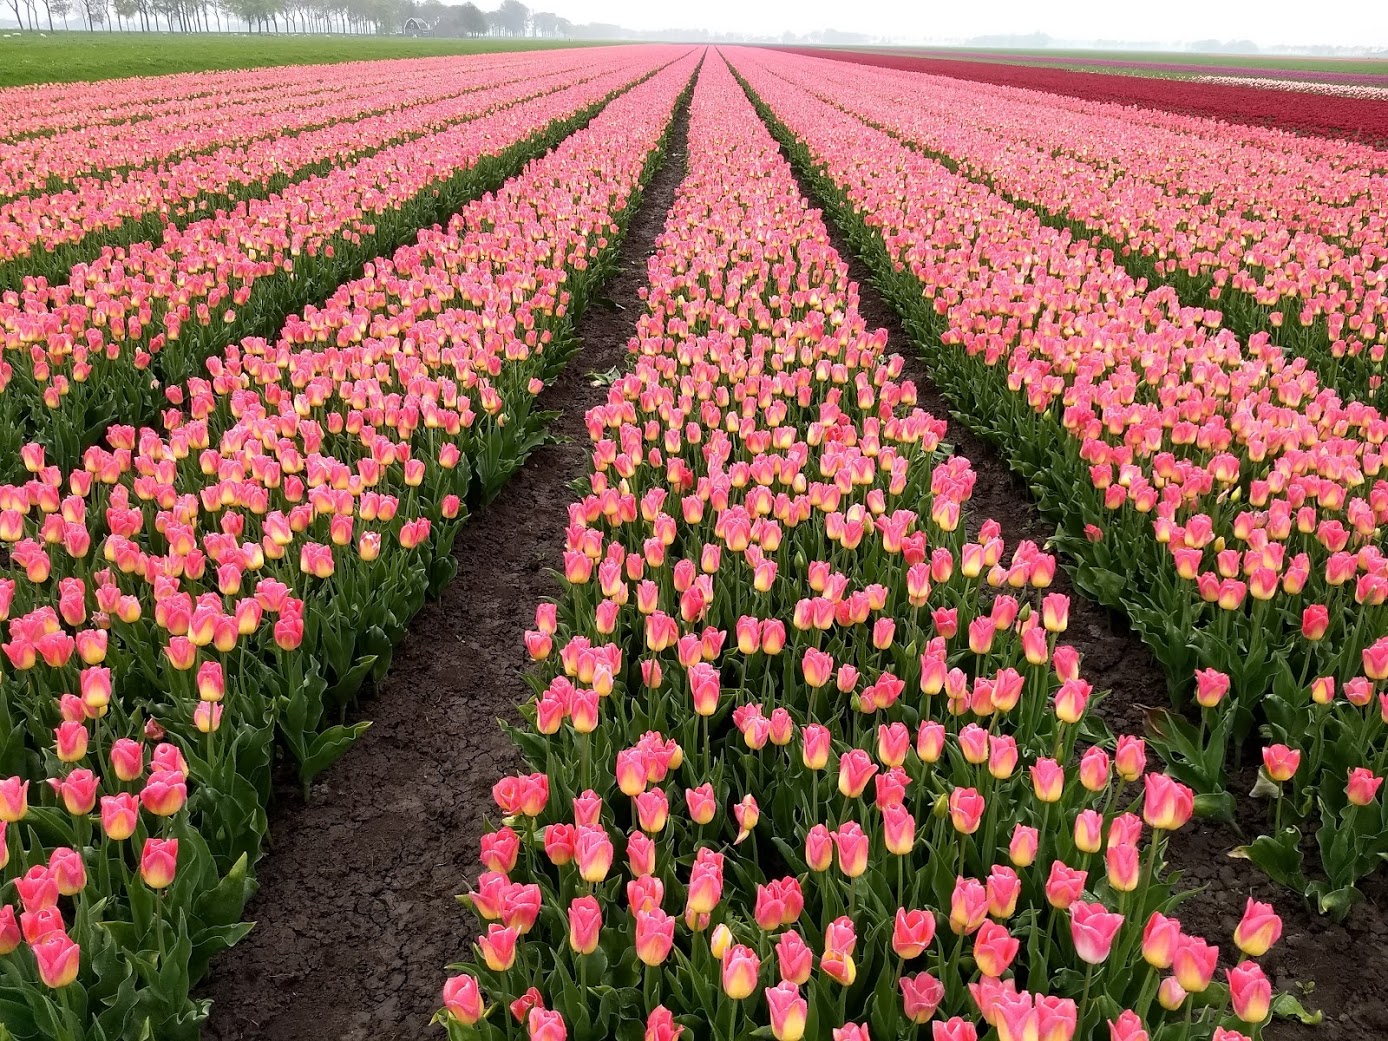 field of pink tulips stretching forever.